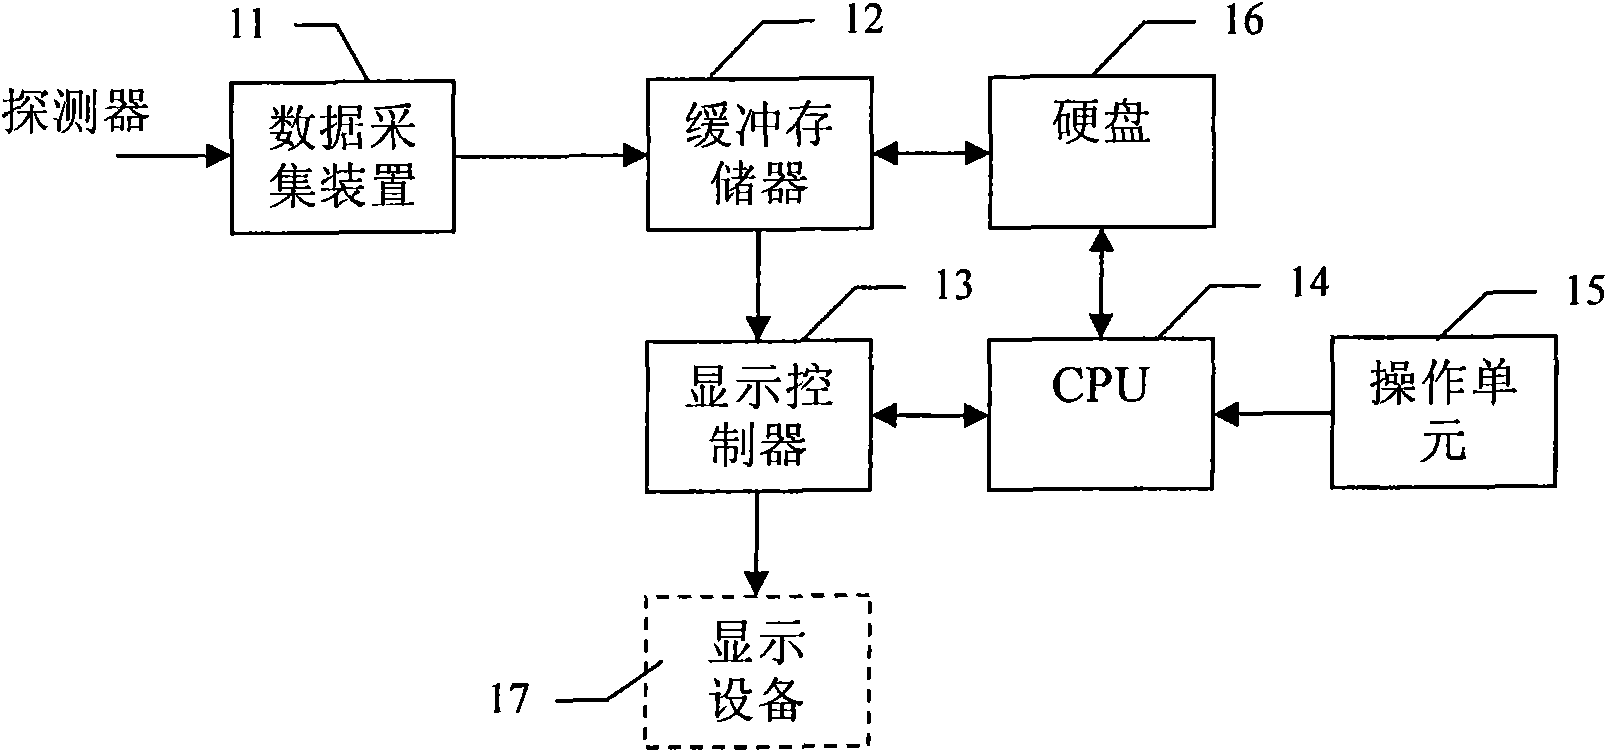 Method for compressing and saving images and security inspection system